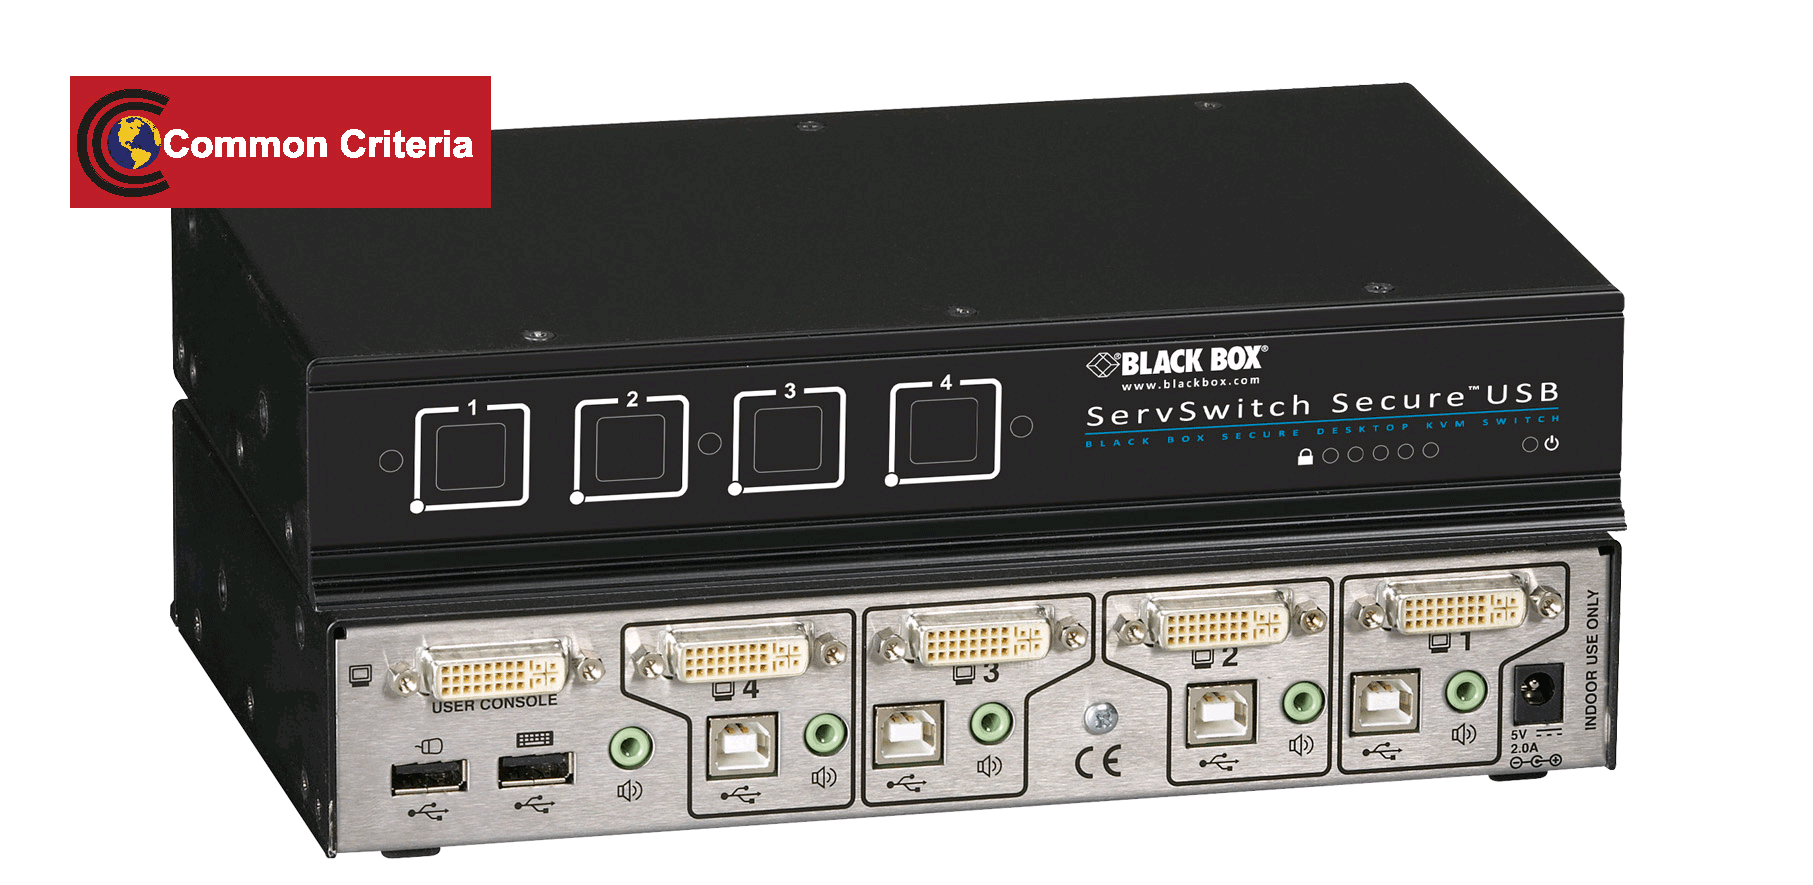 Black Box’s new ServSwitch™ Secure KVM Switch with USB meets international Common Criteria EAL4+ requirements, augmented by ALC_FLR.2 and ATE_DPT.2.